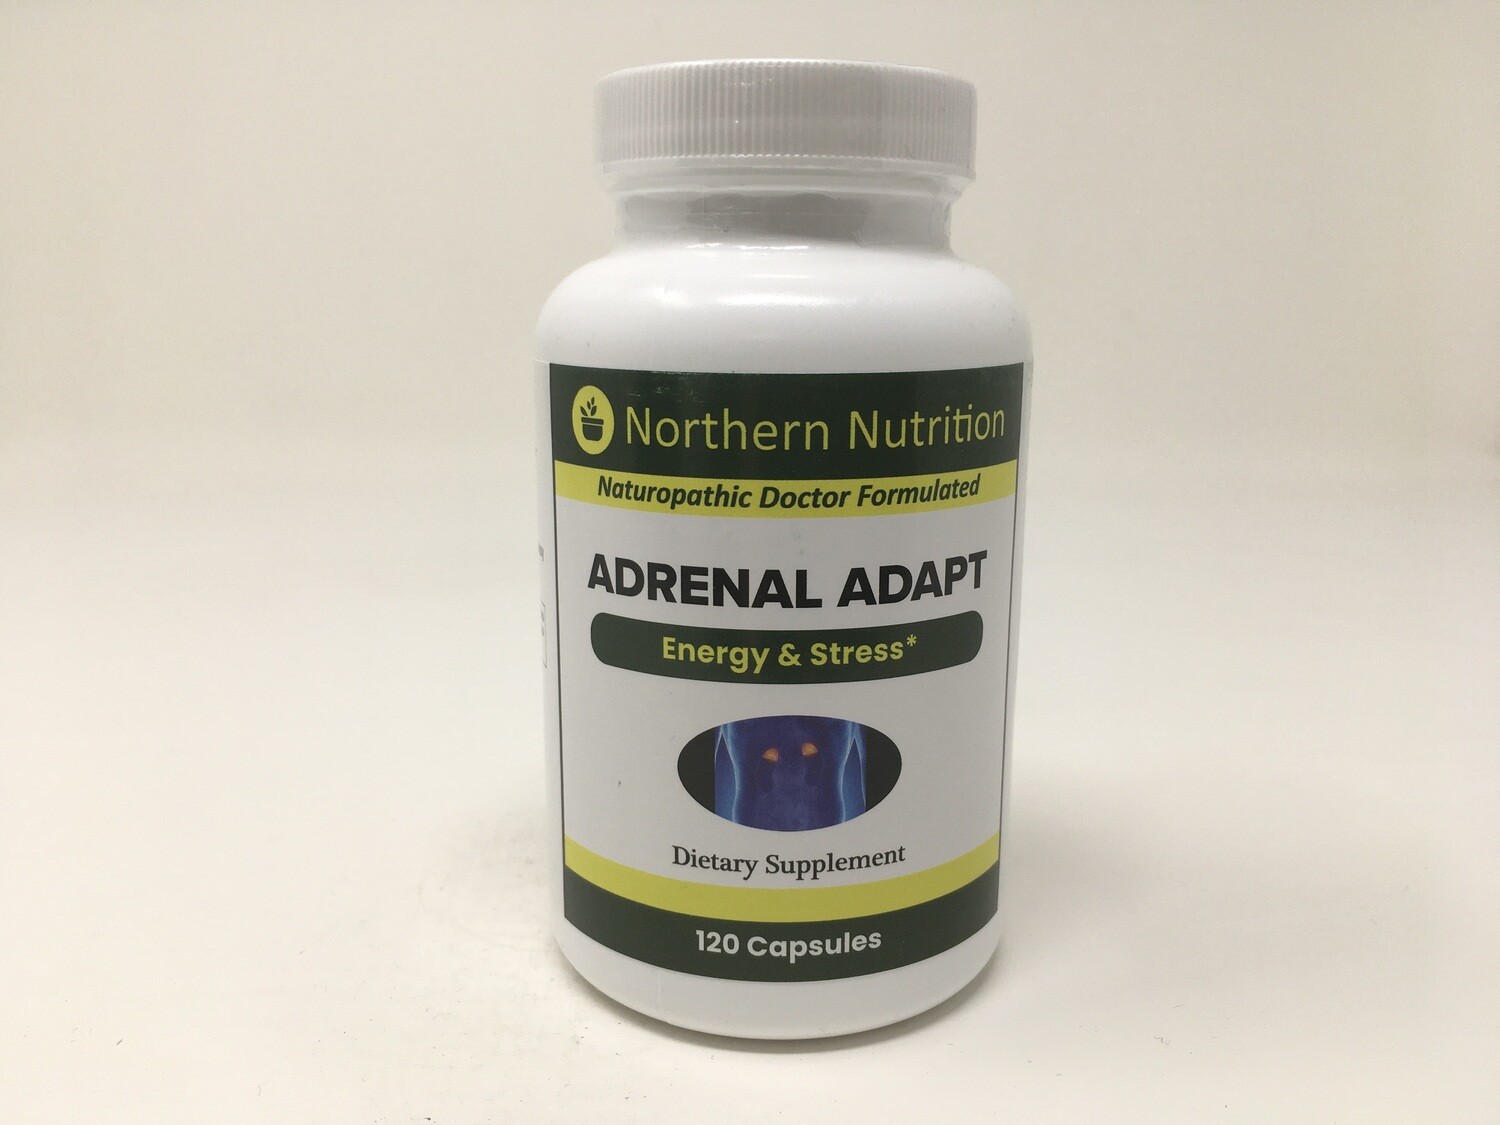 Adrenal Adapt 120 caps (Northern Nutrition)